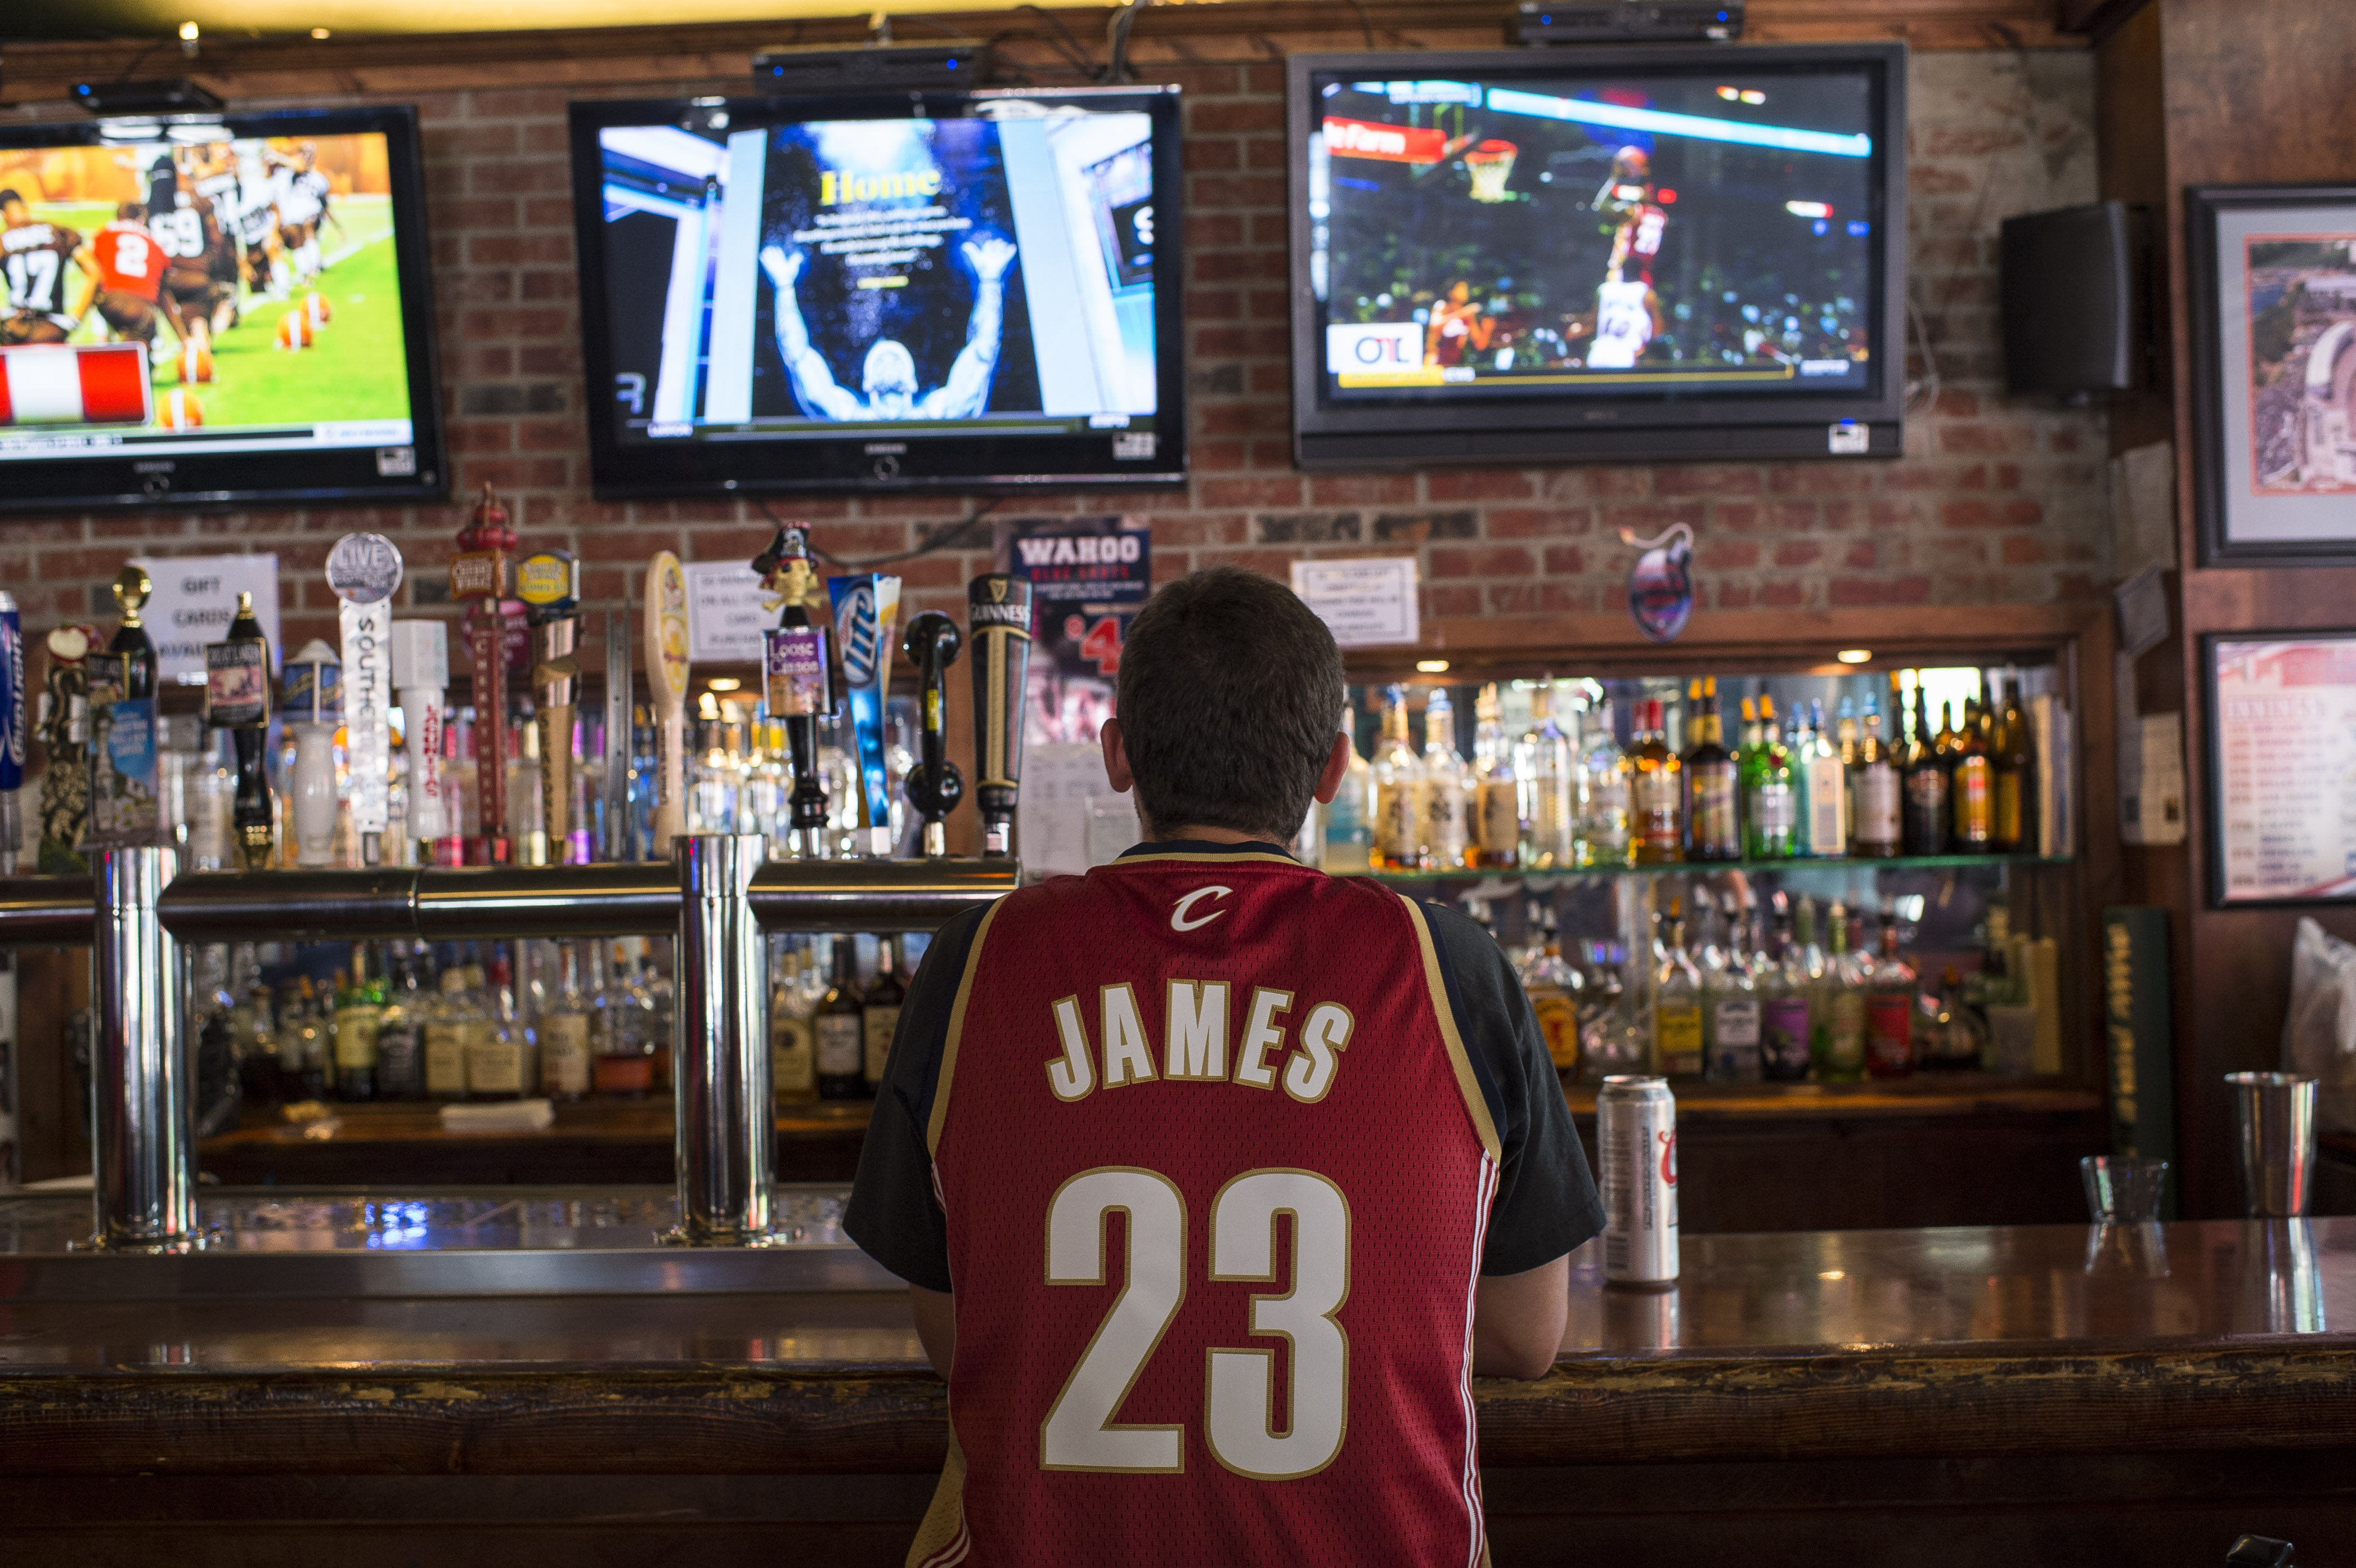 A Cleveland Cavaliers fan watches news coverage of LeBron James' return at Panini's Bar and Grille in downtown Cleveland on July 11, 2014 (Angelo Merendino&amp;mdash;Getty Images)